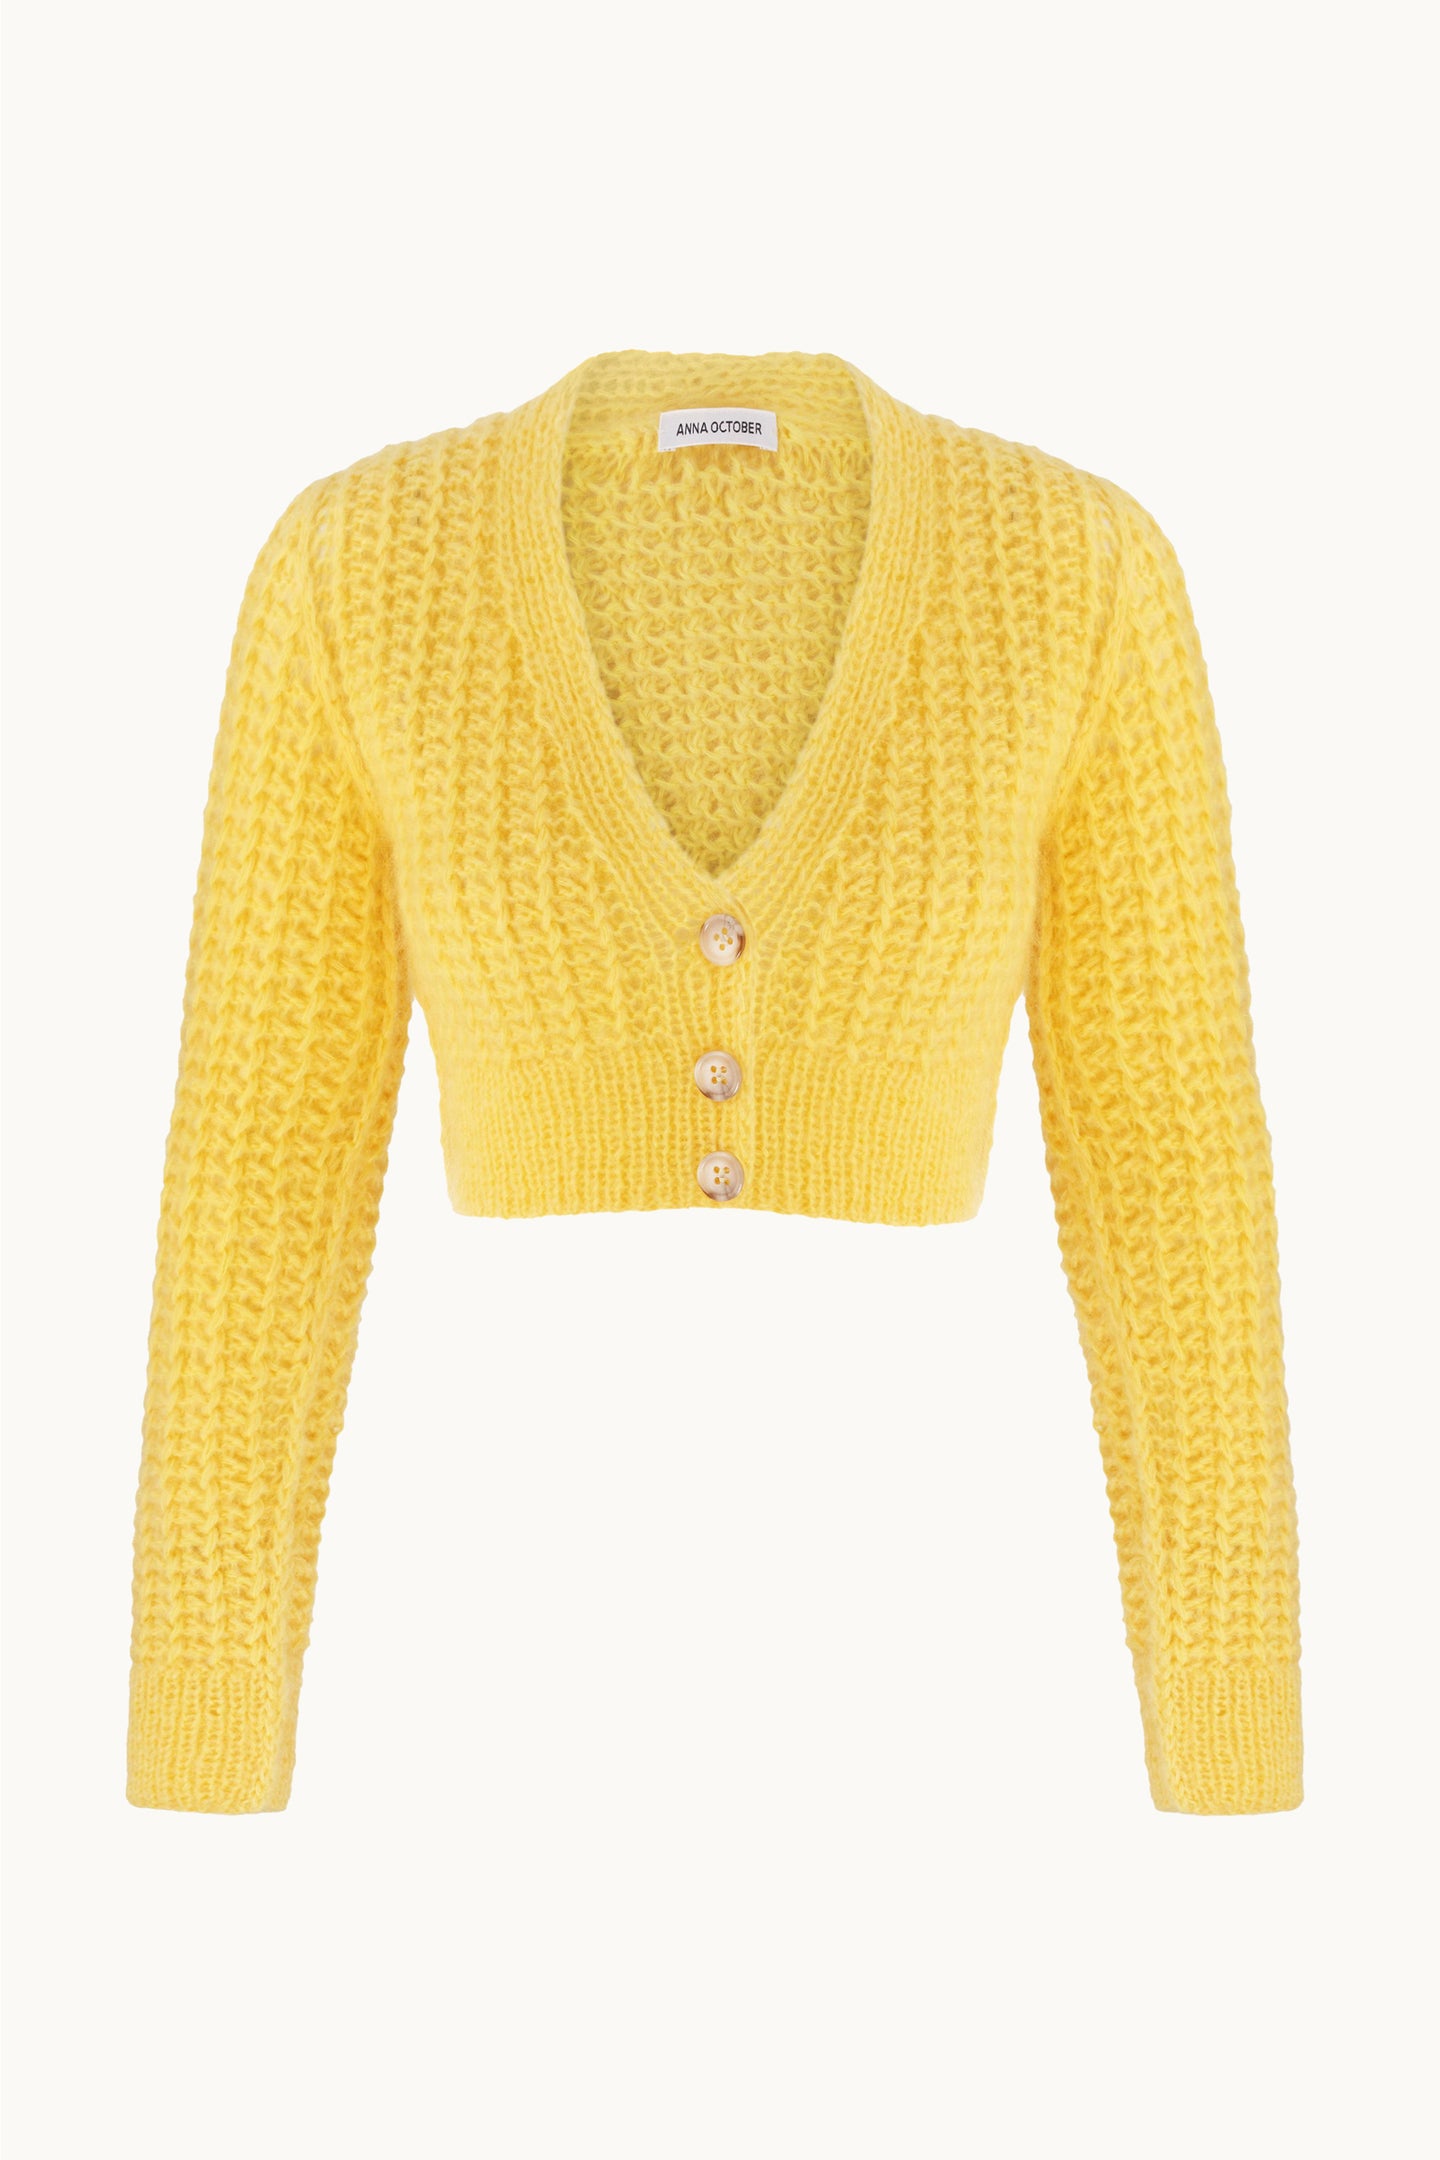 Zoey yellow cardigan front view